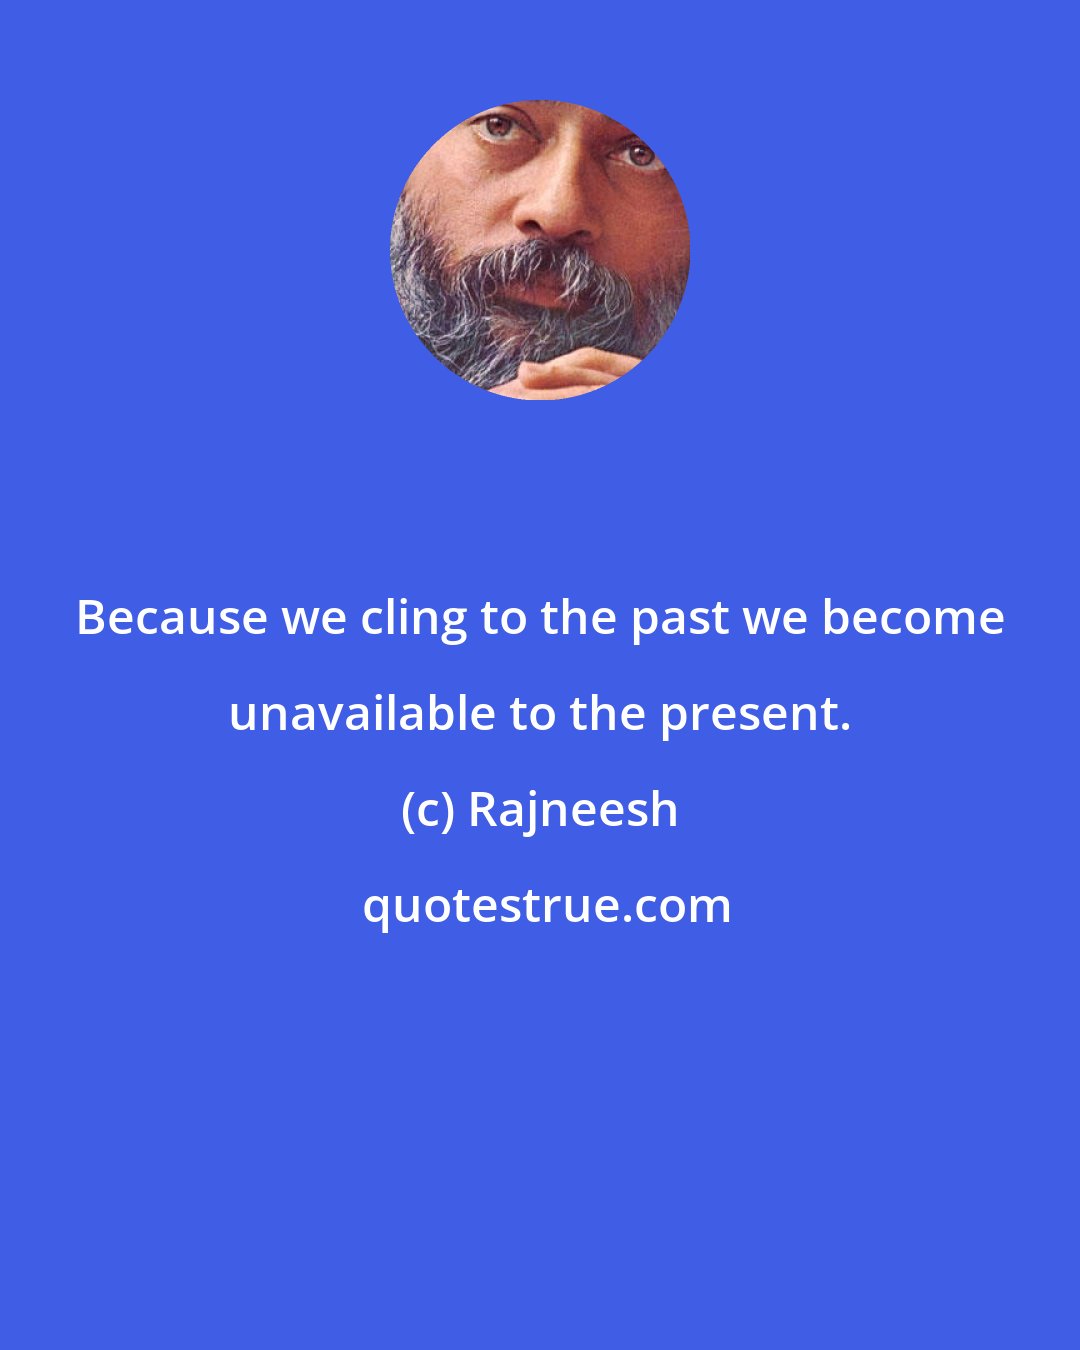 Rajneesh: Because we cling to the past we become unavailable to the present.